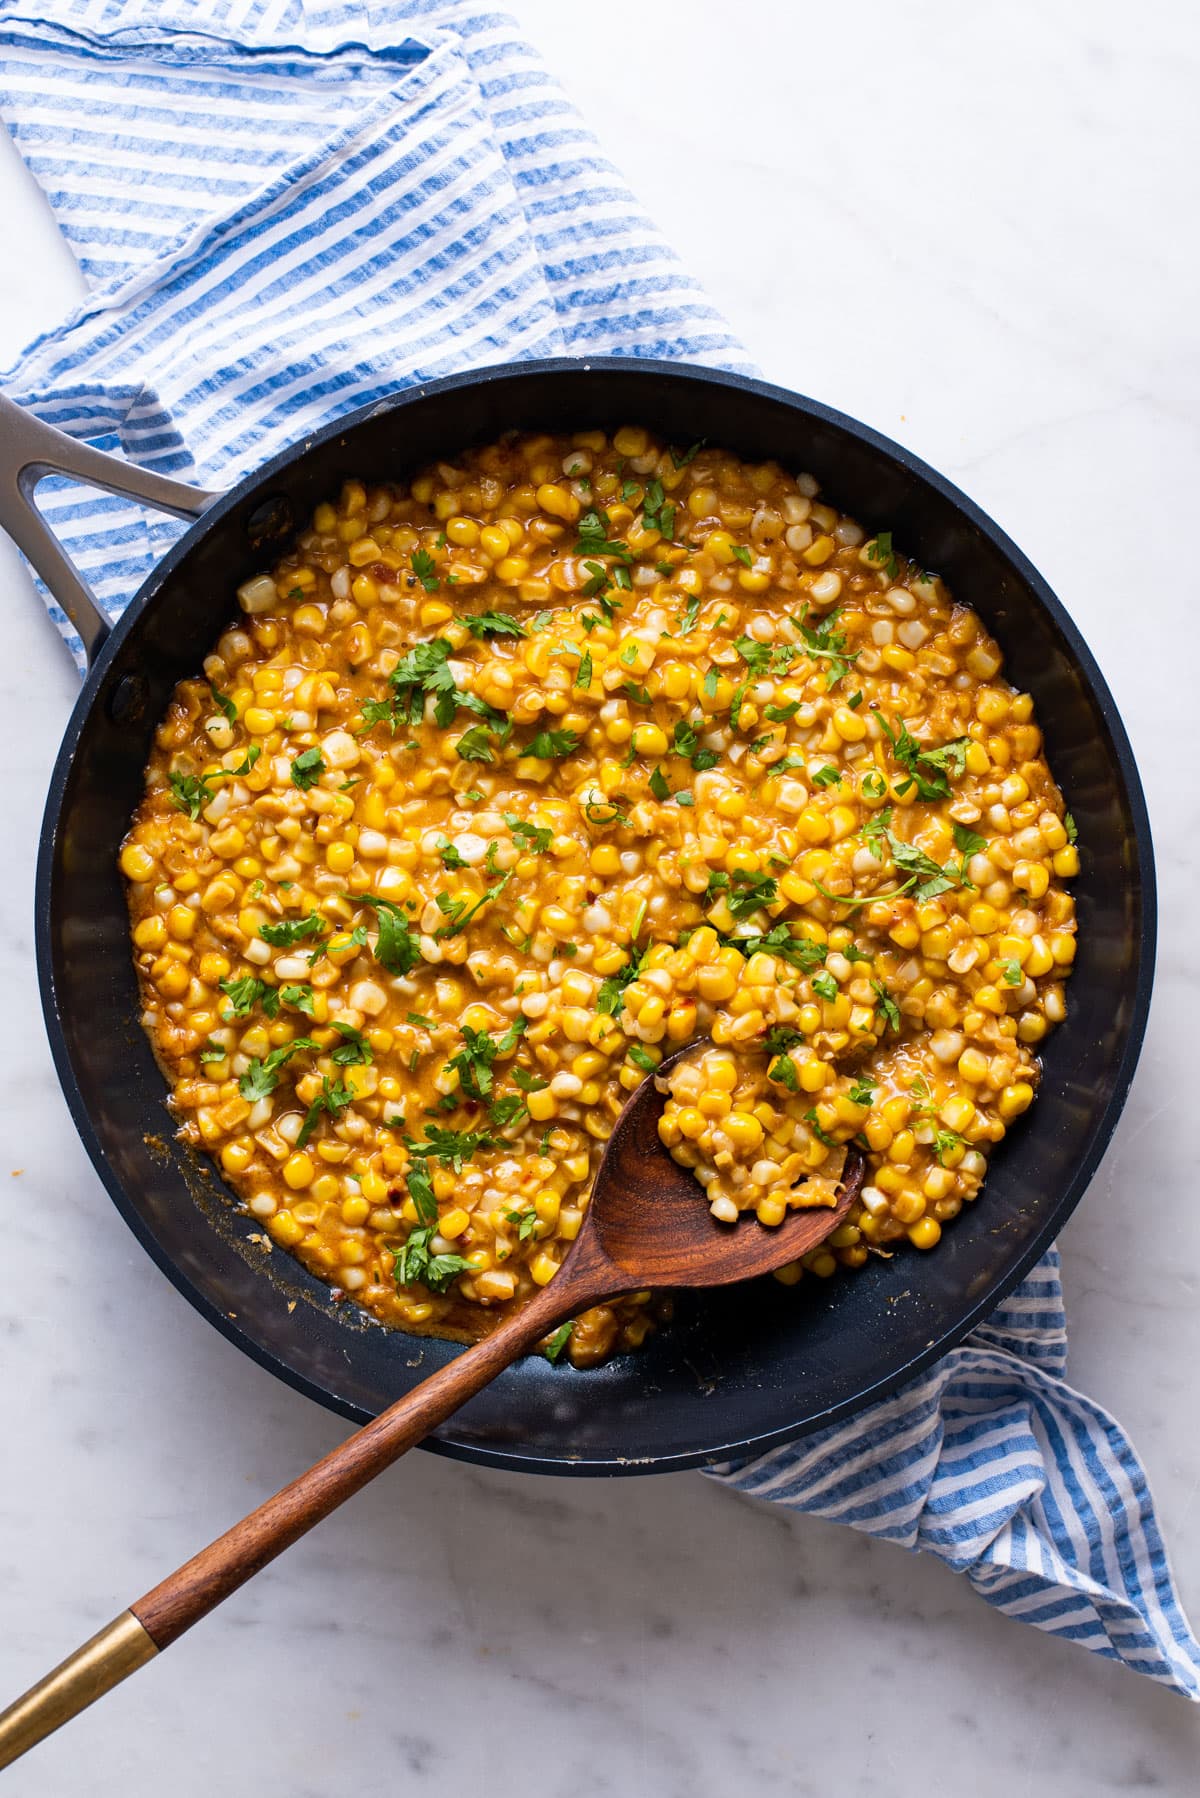 Creamed corn in a skillet garnished with cilantro.